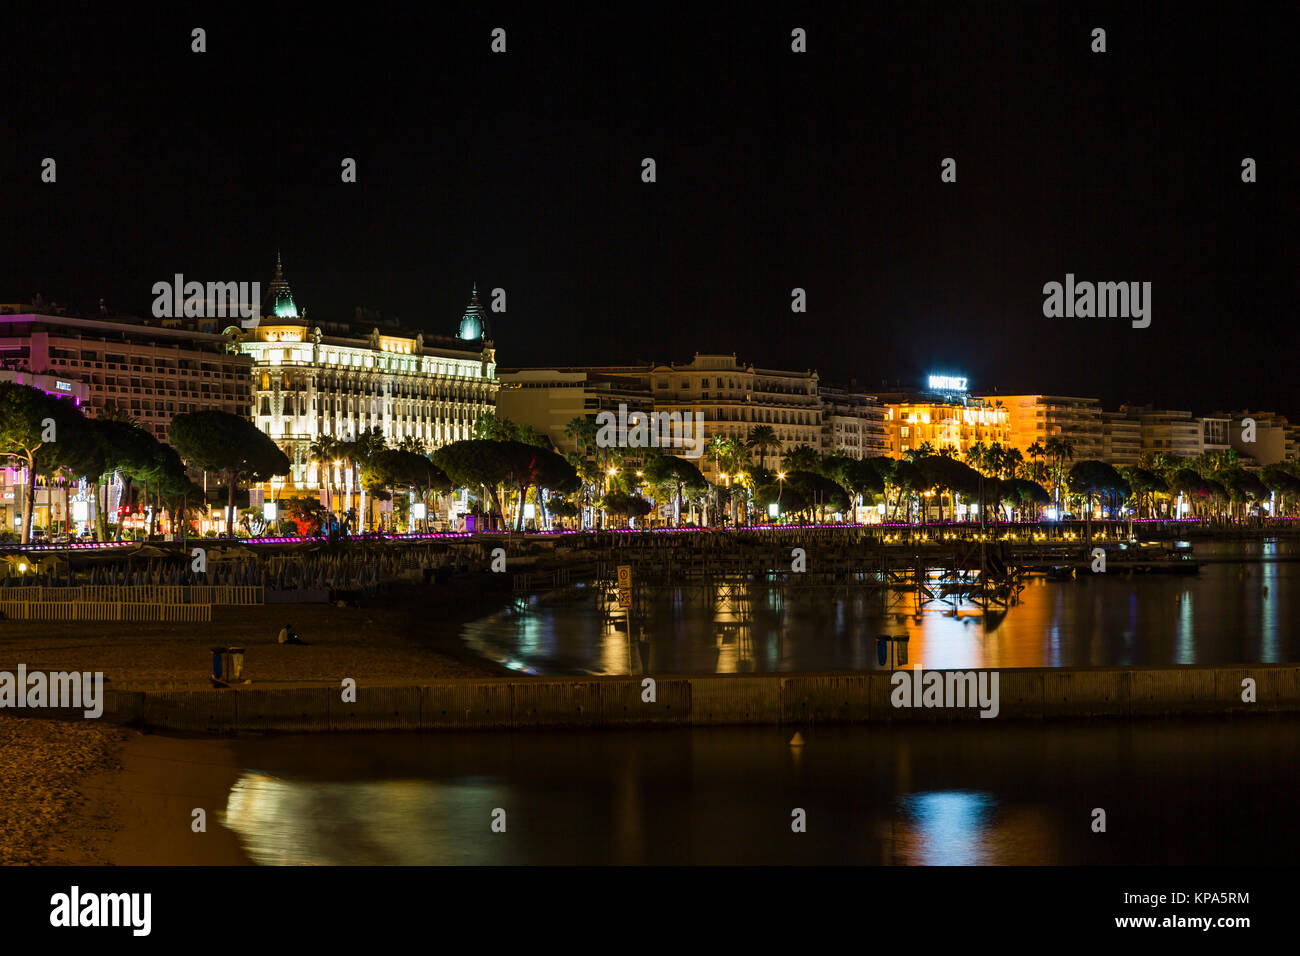 CANNES, FRANCE - September 8 2015, Night view. Image shows the cosmopolitan city of Cannes in the French Riviera, in the background illuminated city Stock Photo